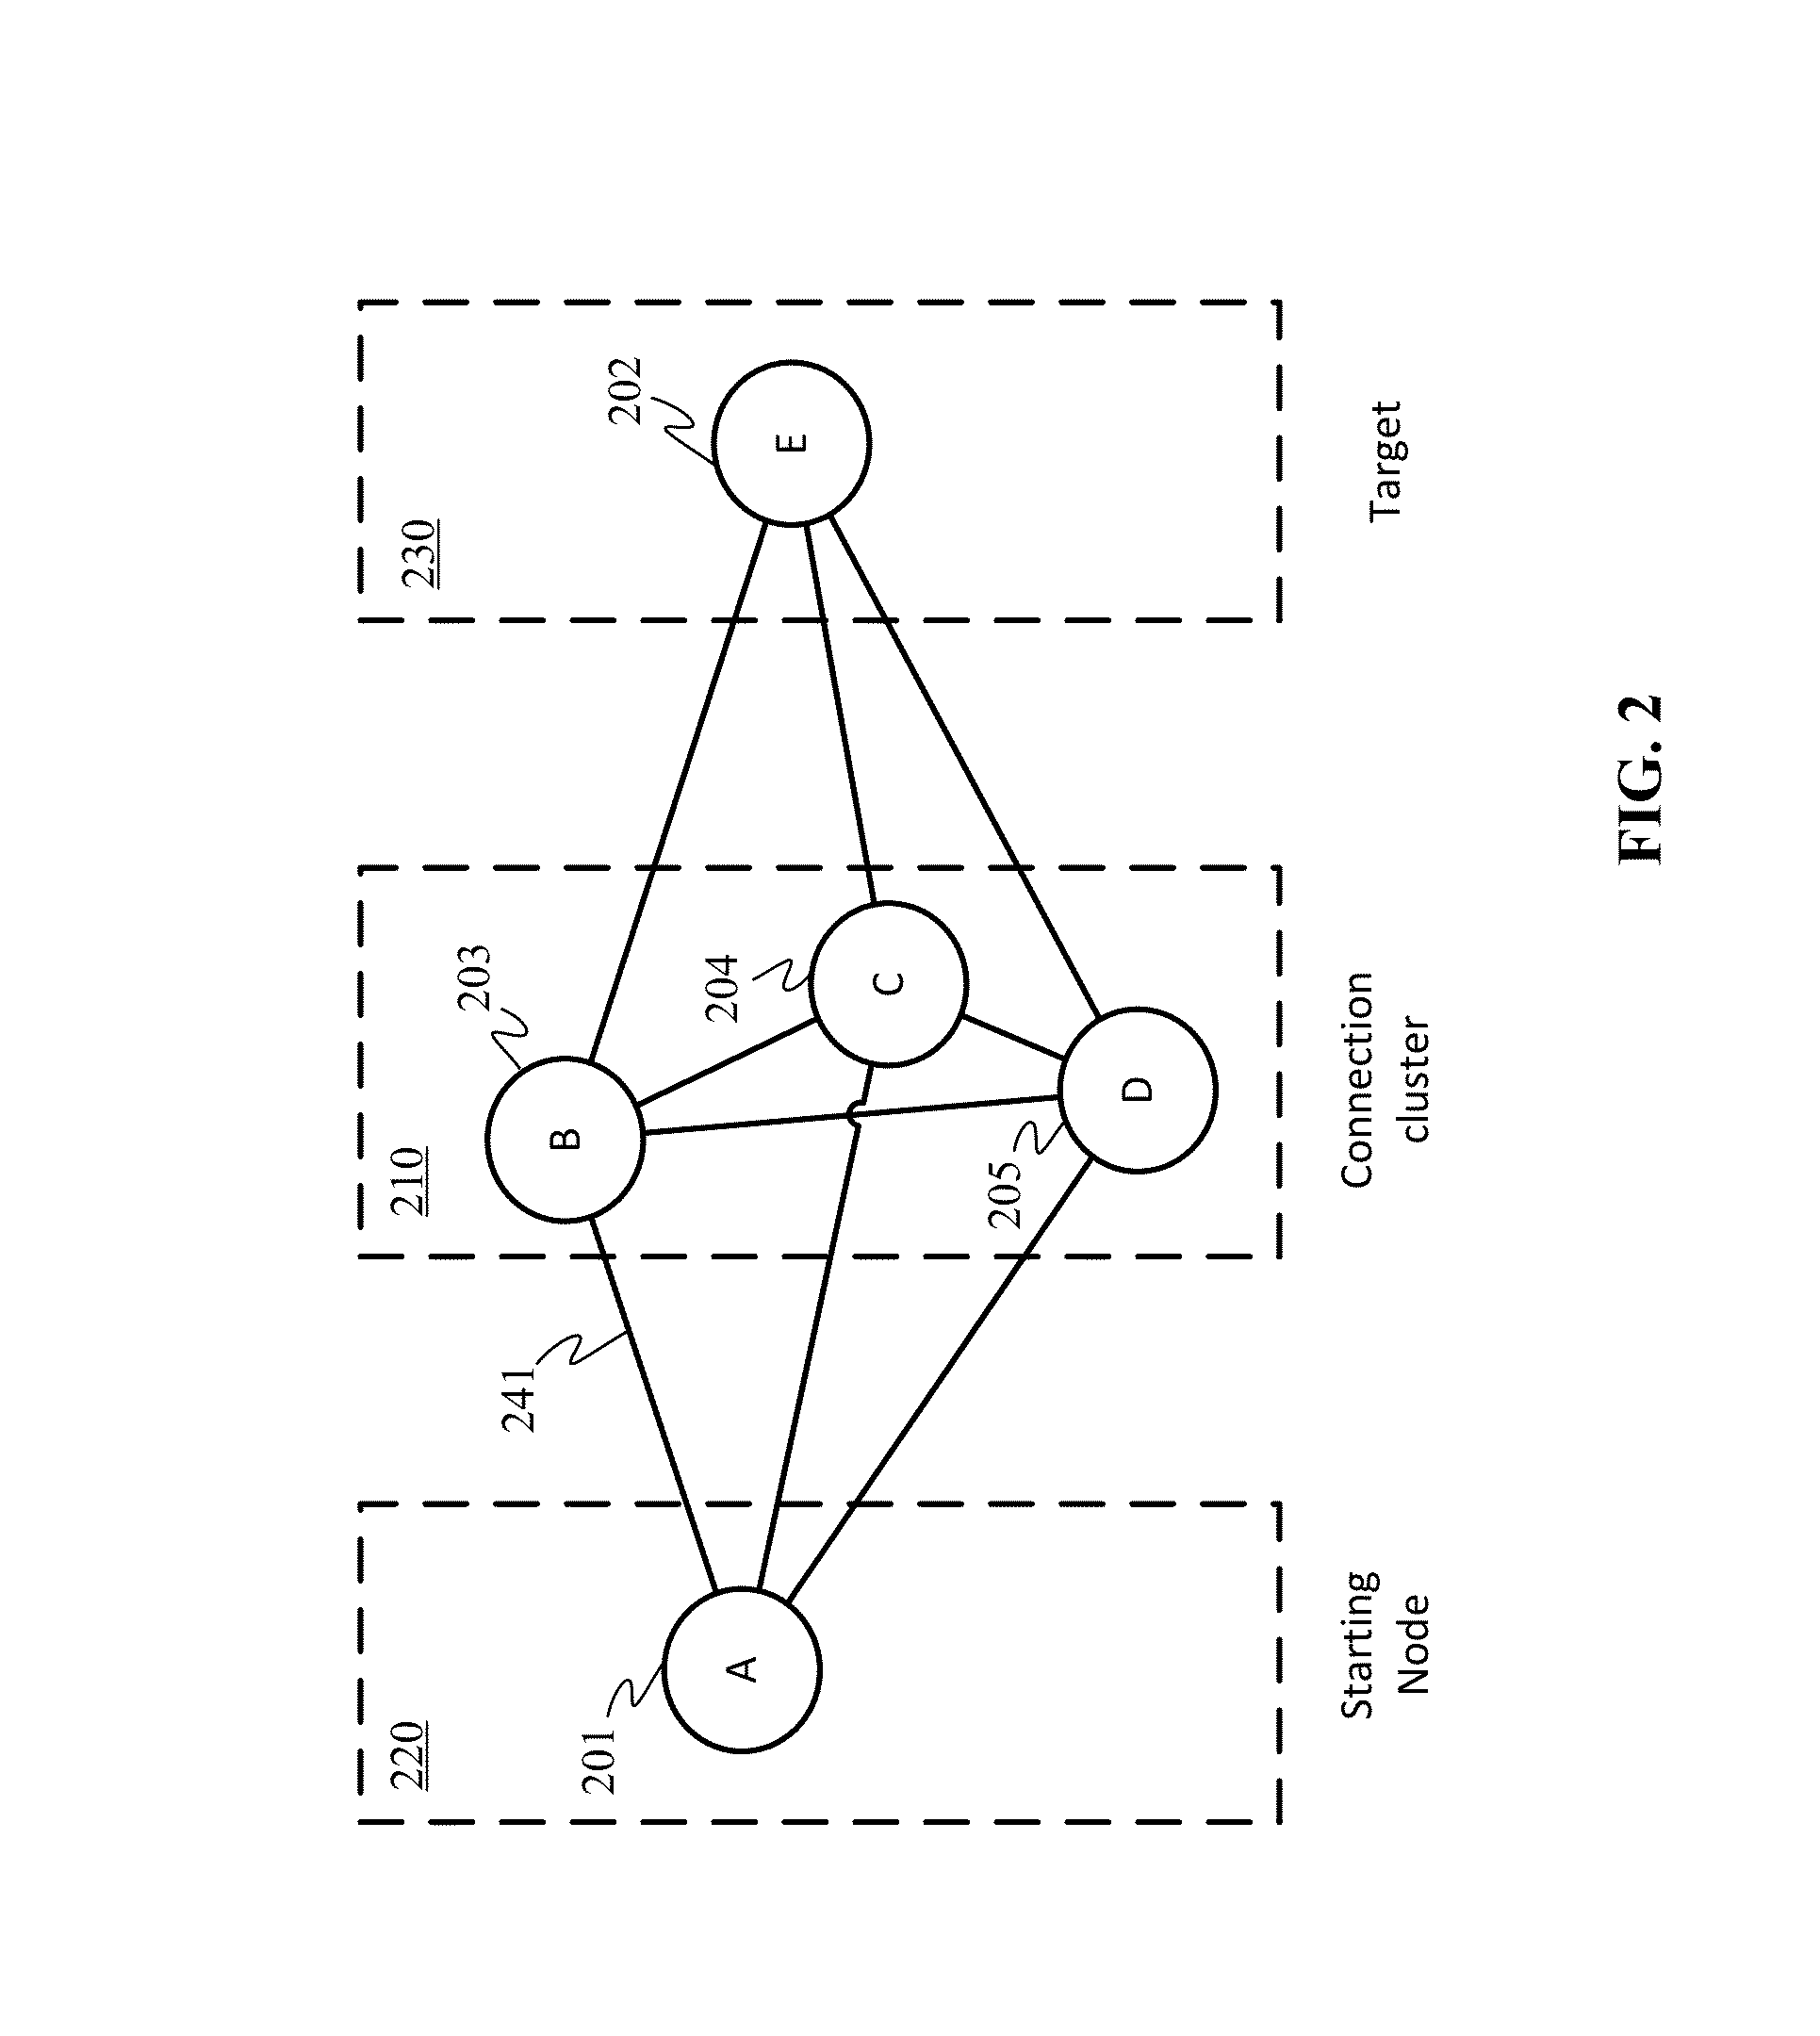 Methods of searching through indirect cluster connections